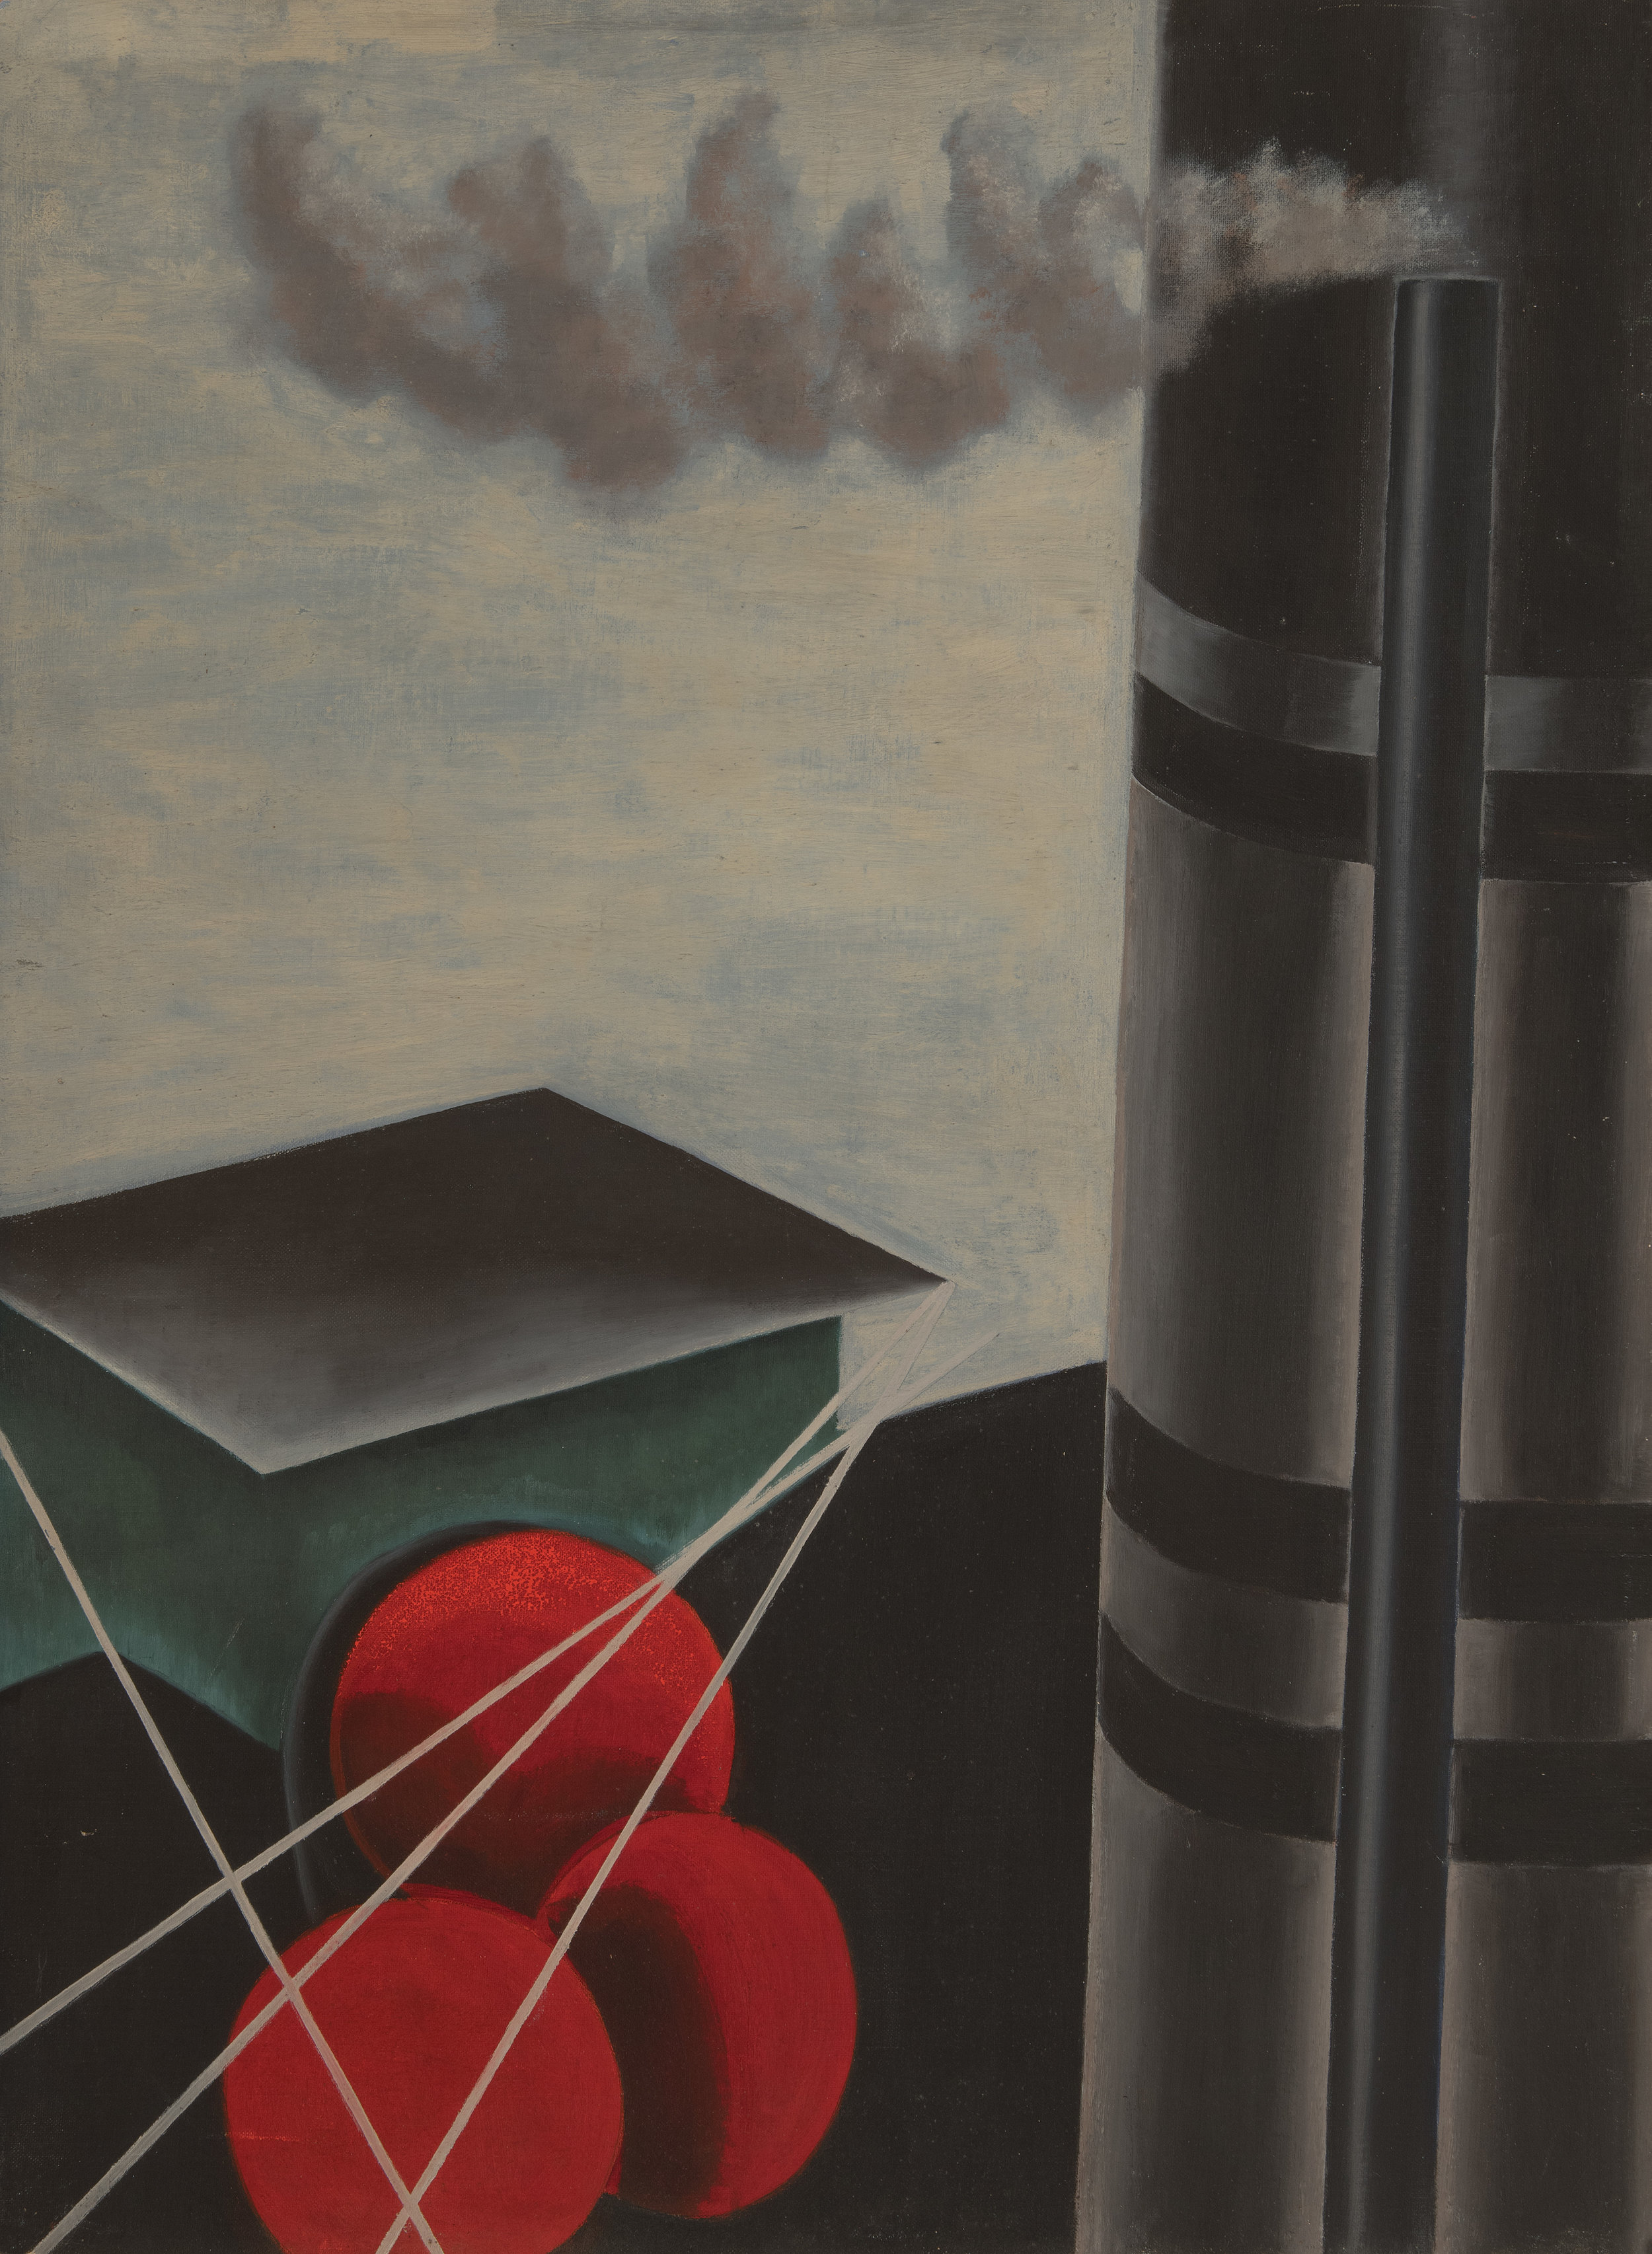 Painting of abstract industrial scene with a black and grey smokestack, three red circles, and a green and grey box